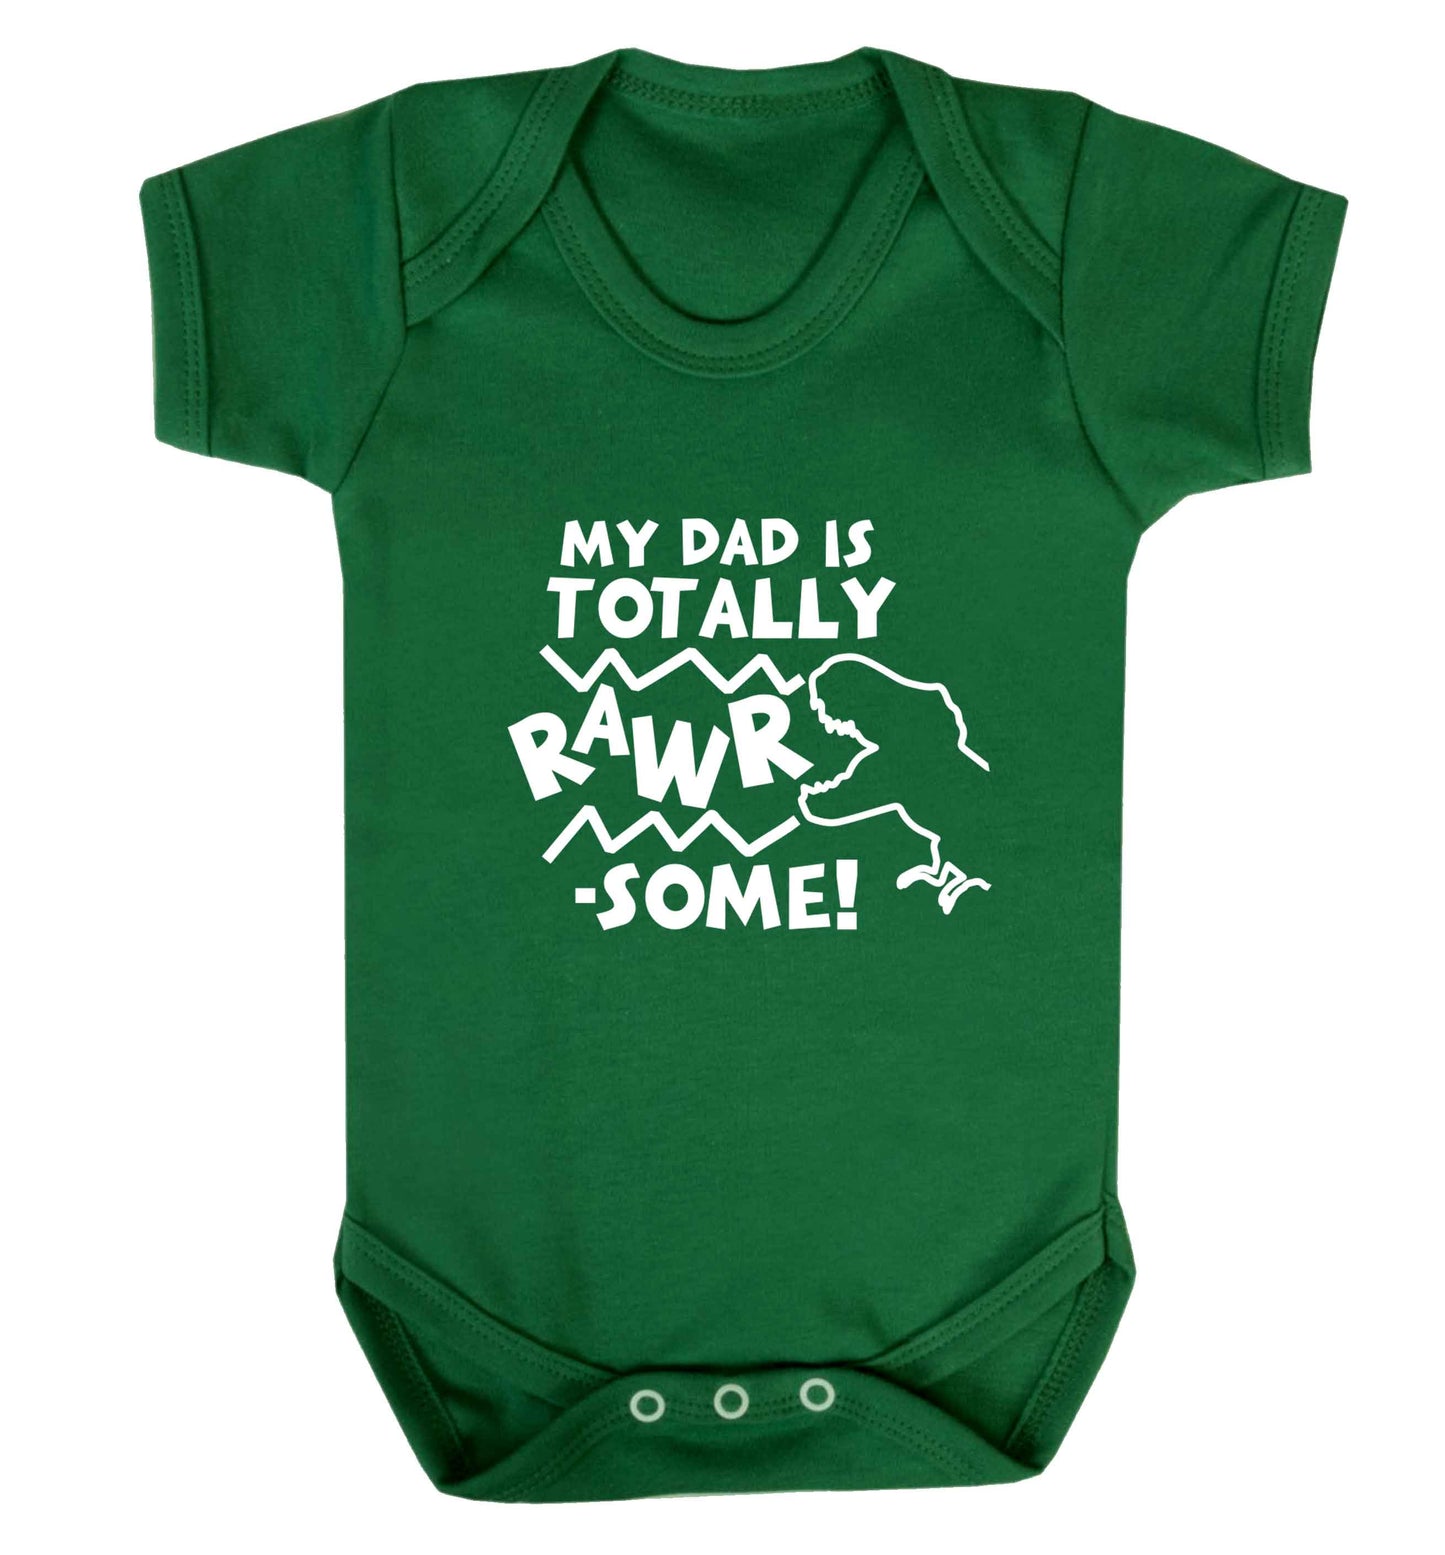 My dad is totally rawrsome baby vest green 18-24 months